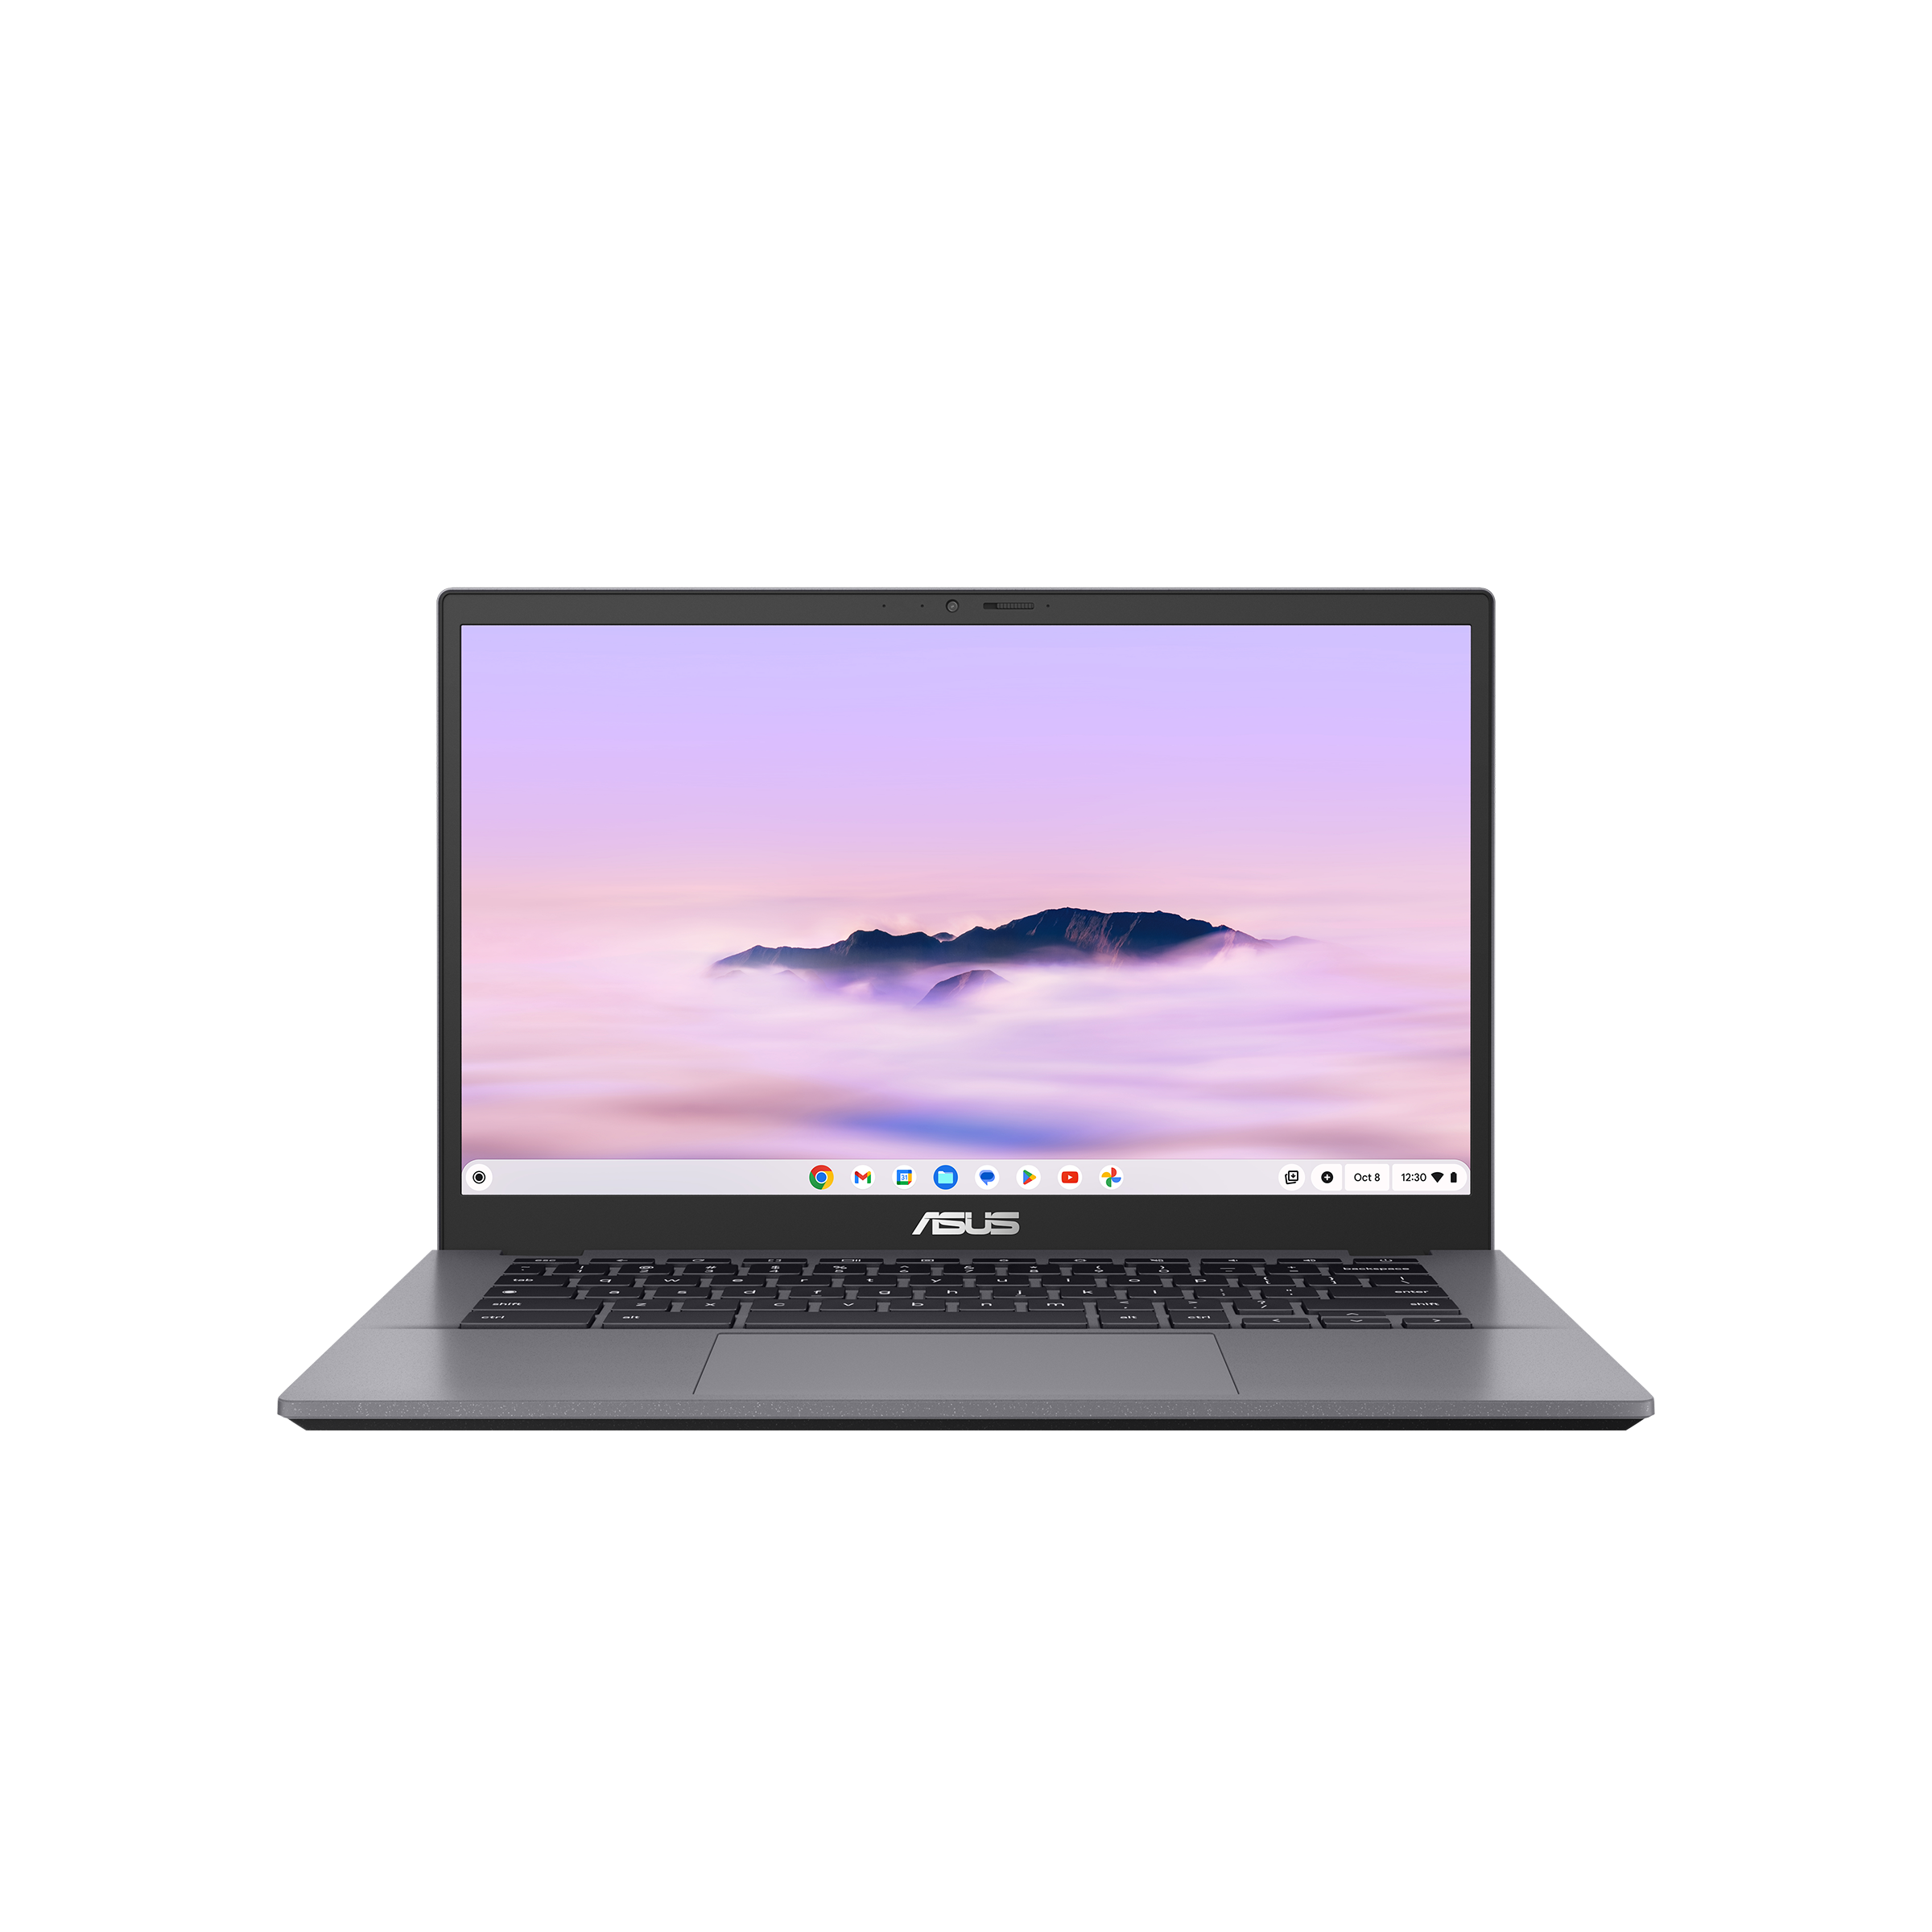 ASUS Chromebook Plus CX34 (CX3402)｜Laptops For Home｜ASUS USA